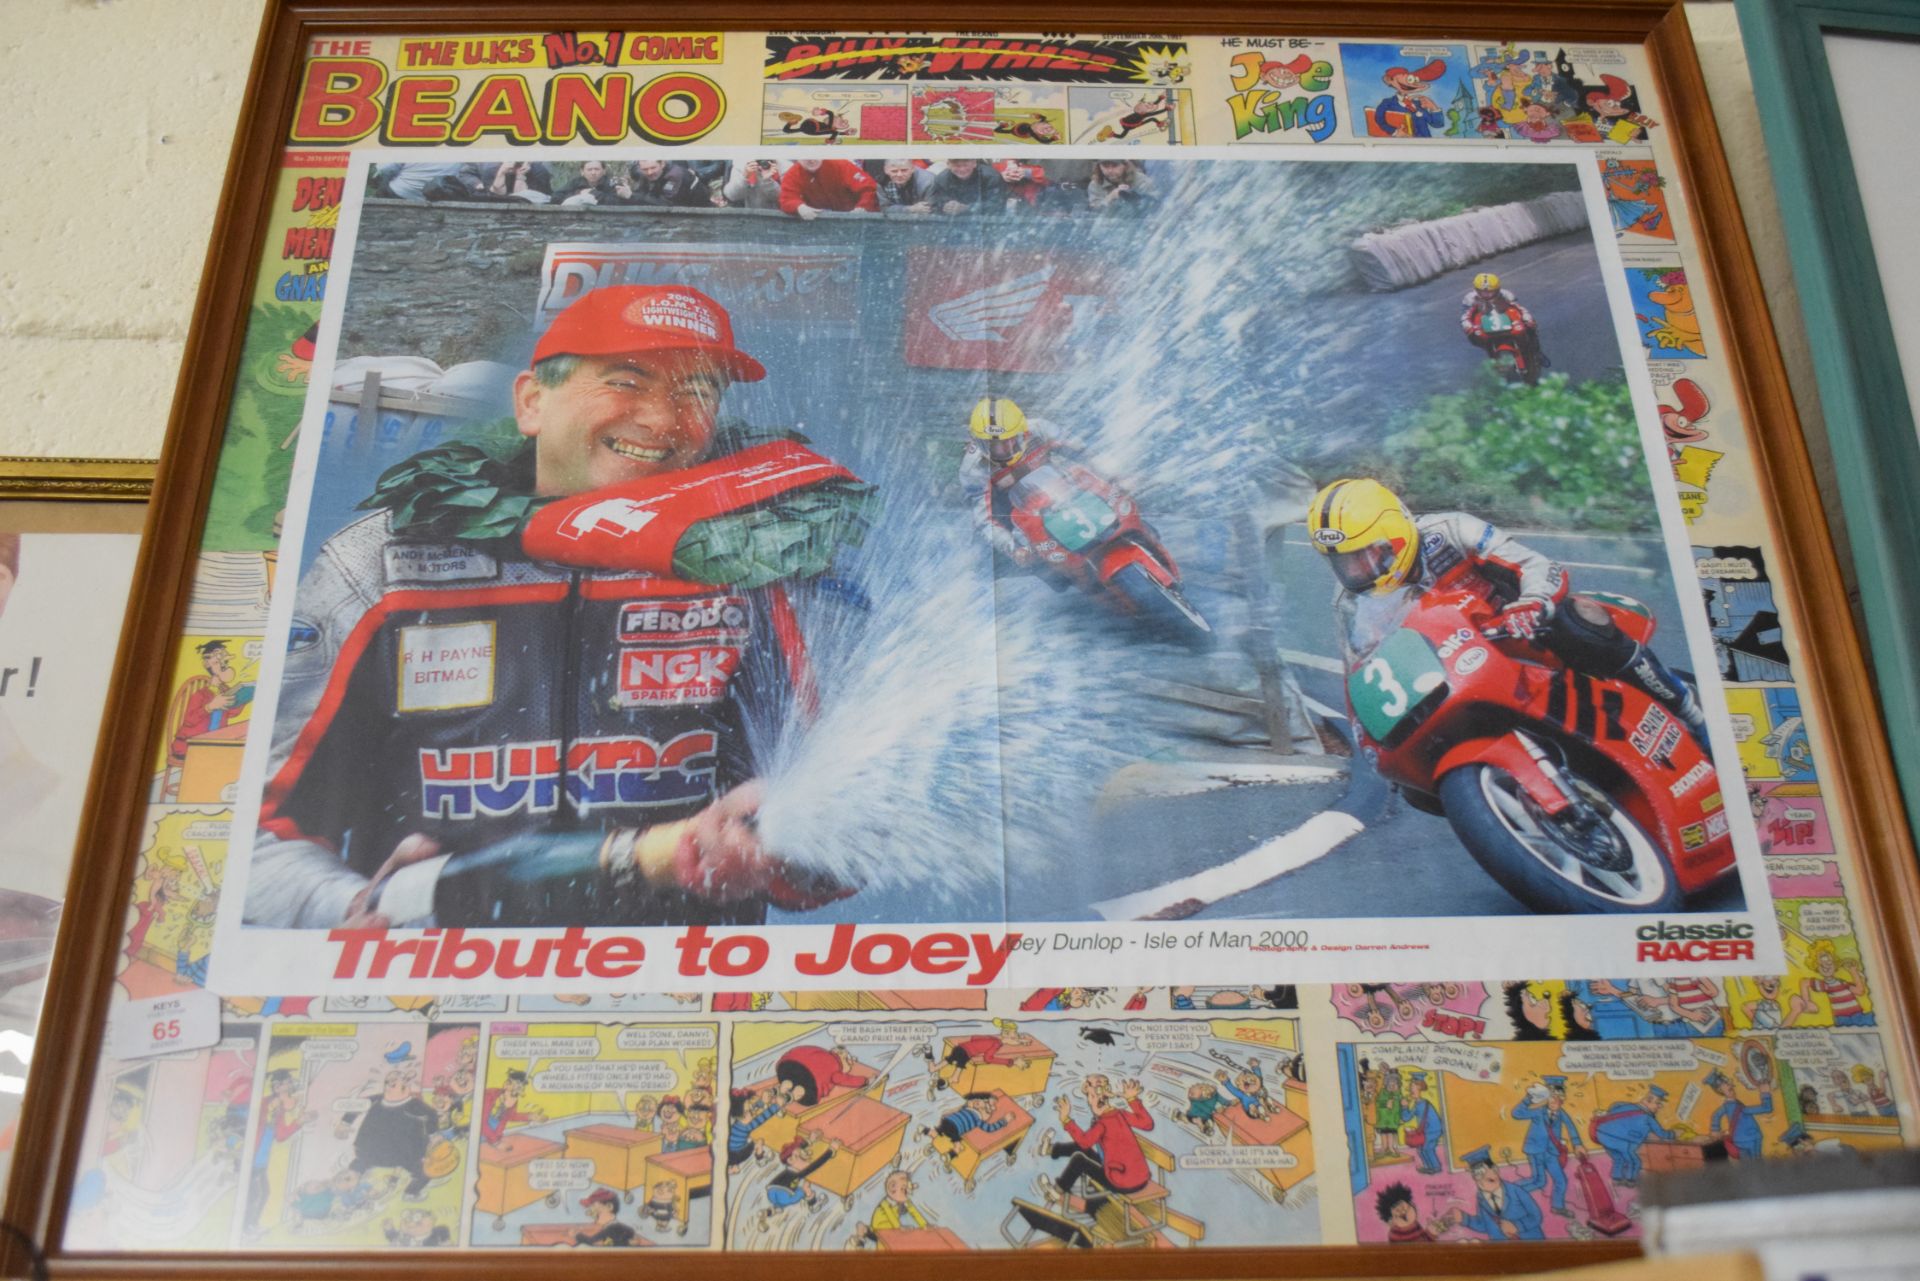 Framed print "Tribute to Joey Dunlop, Isle of Man 2000"